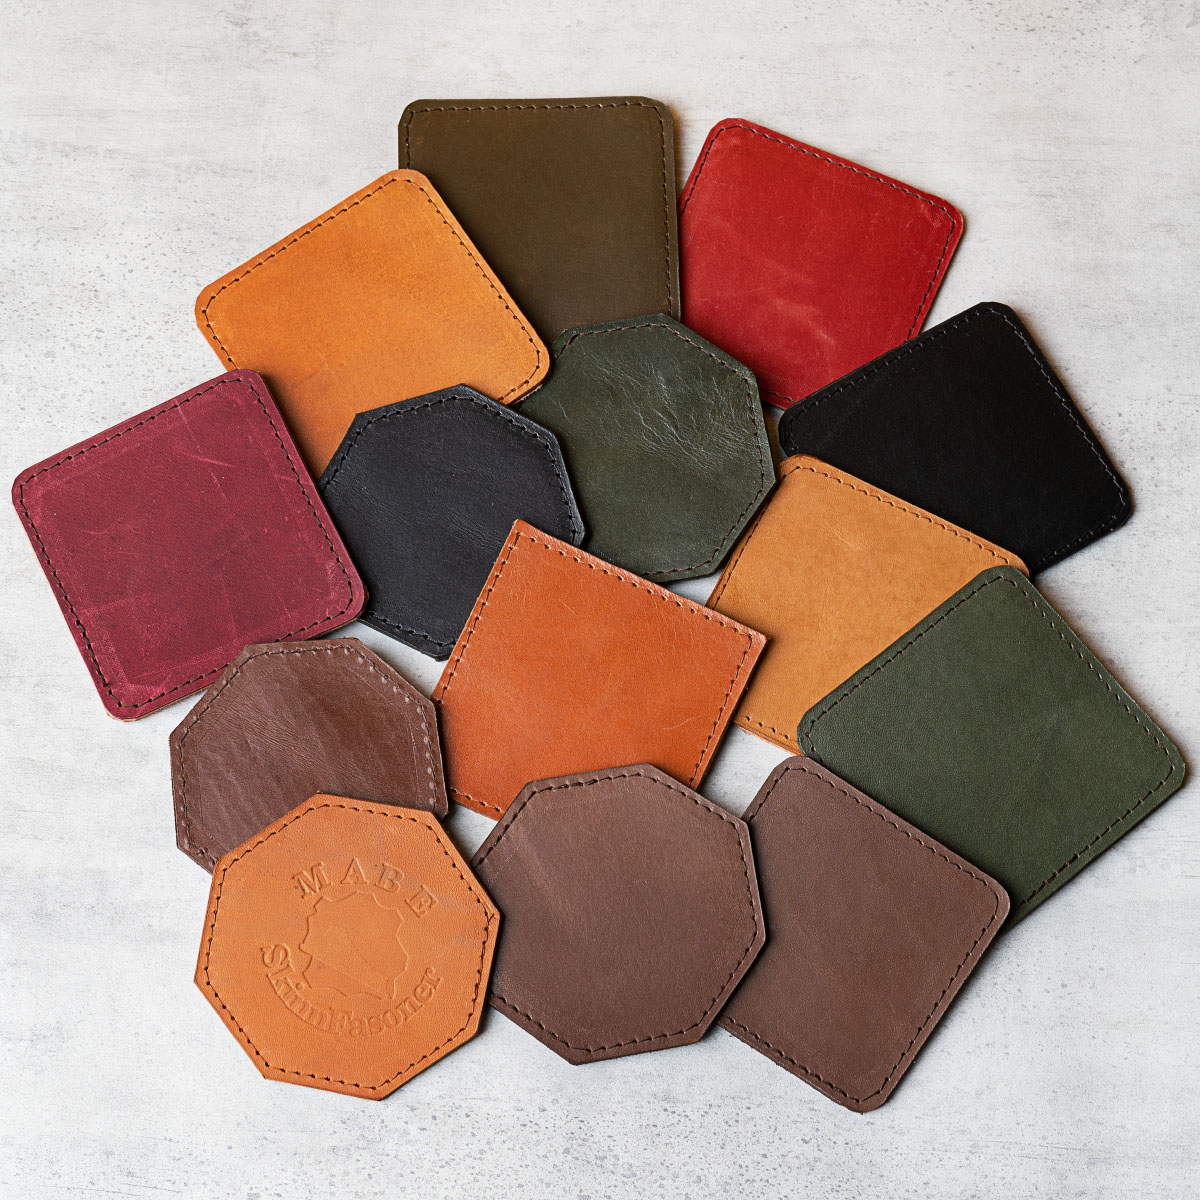 Leather coasters in leather 6 - pack mix